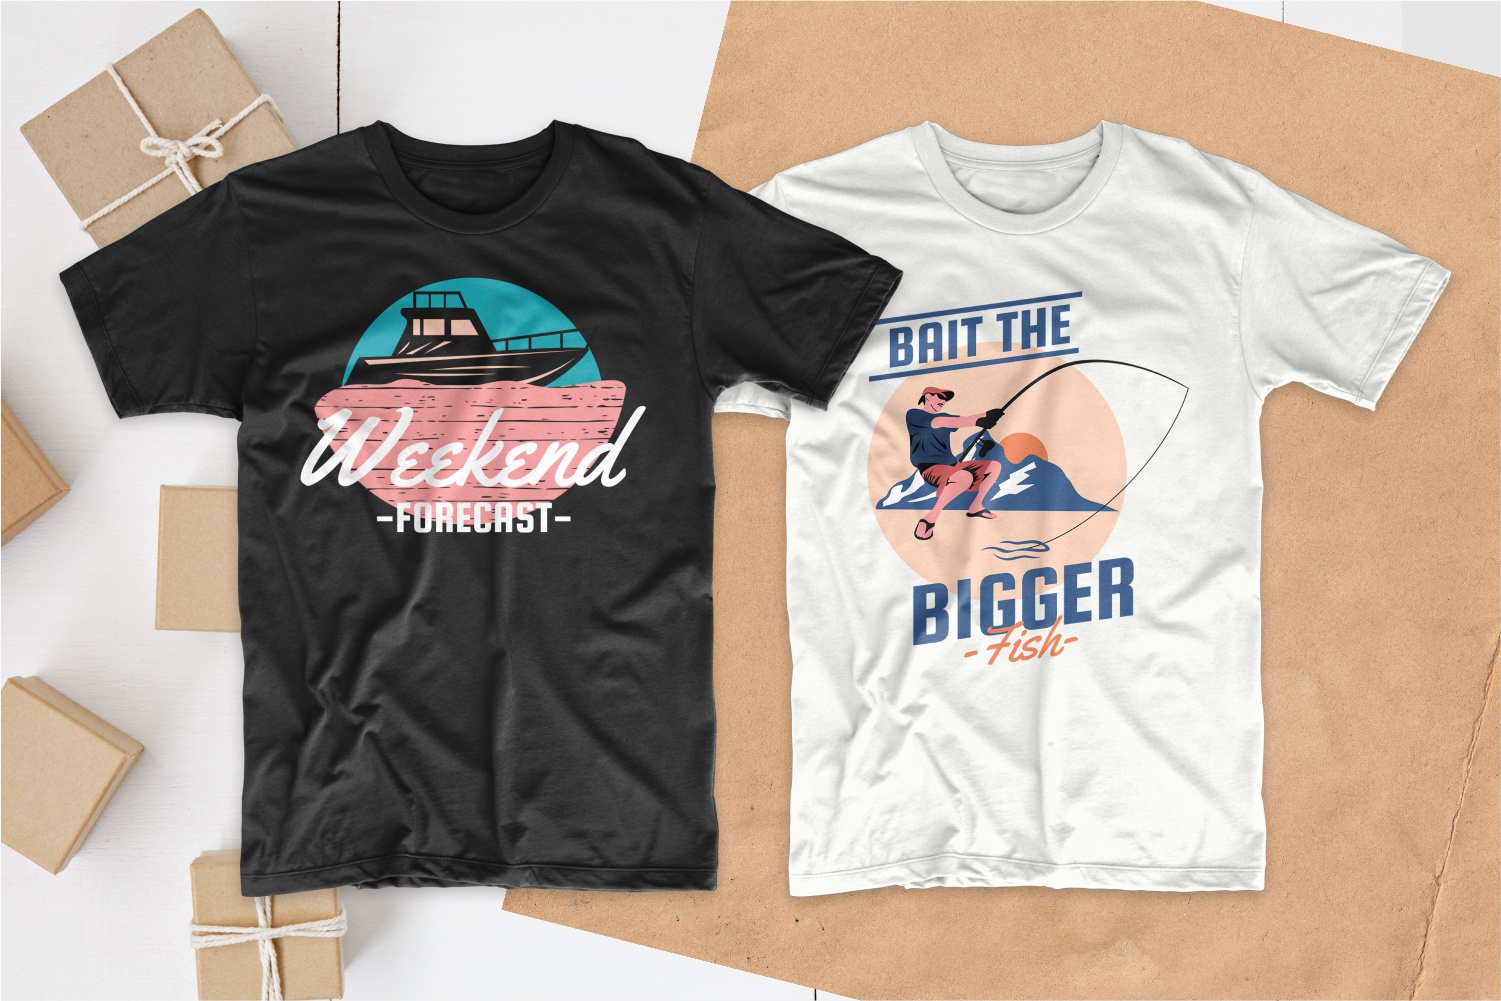 Fishing T-shirts with pastel graphics.